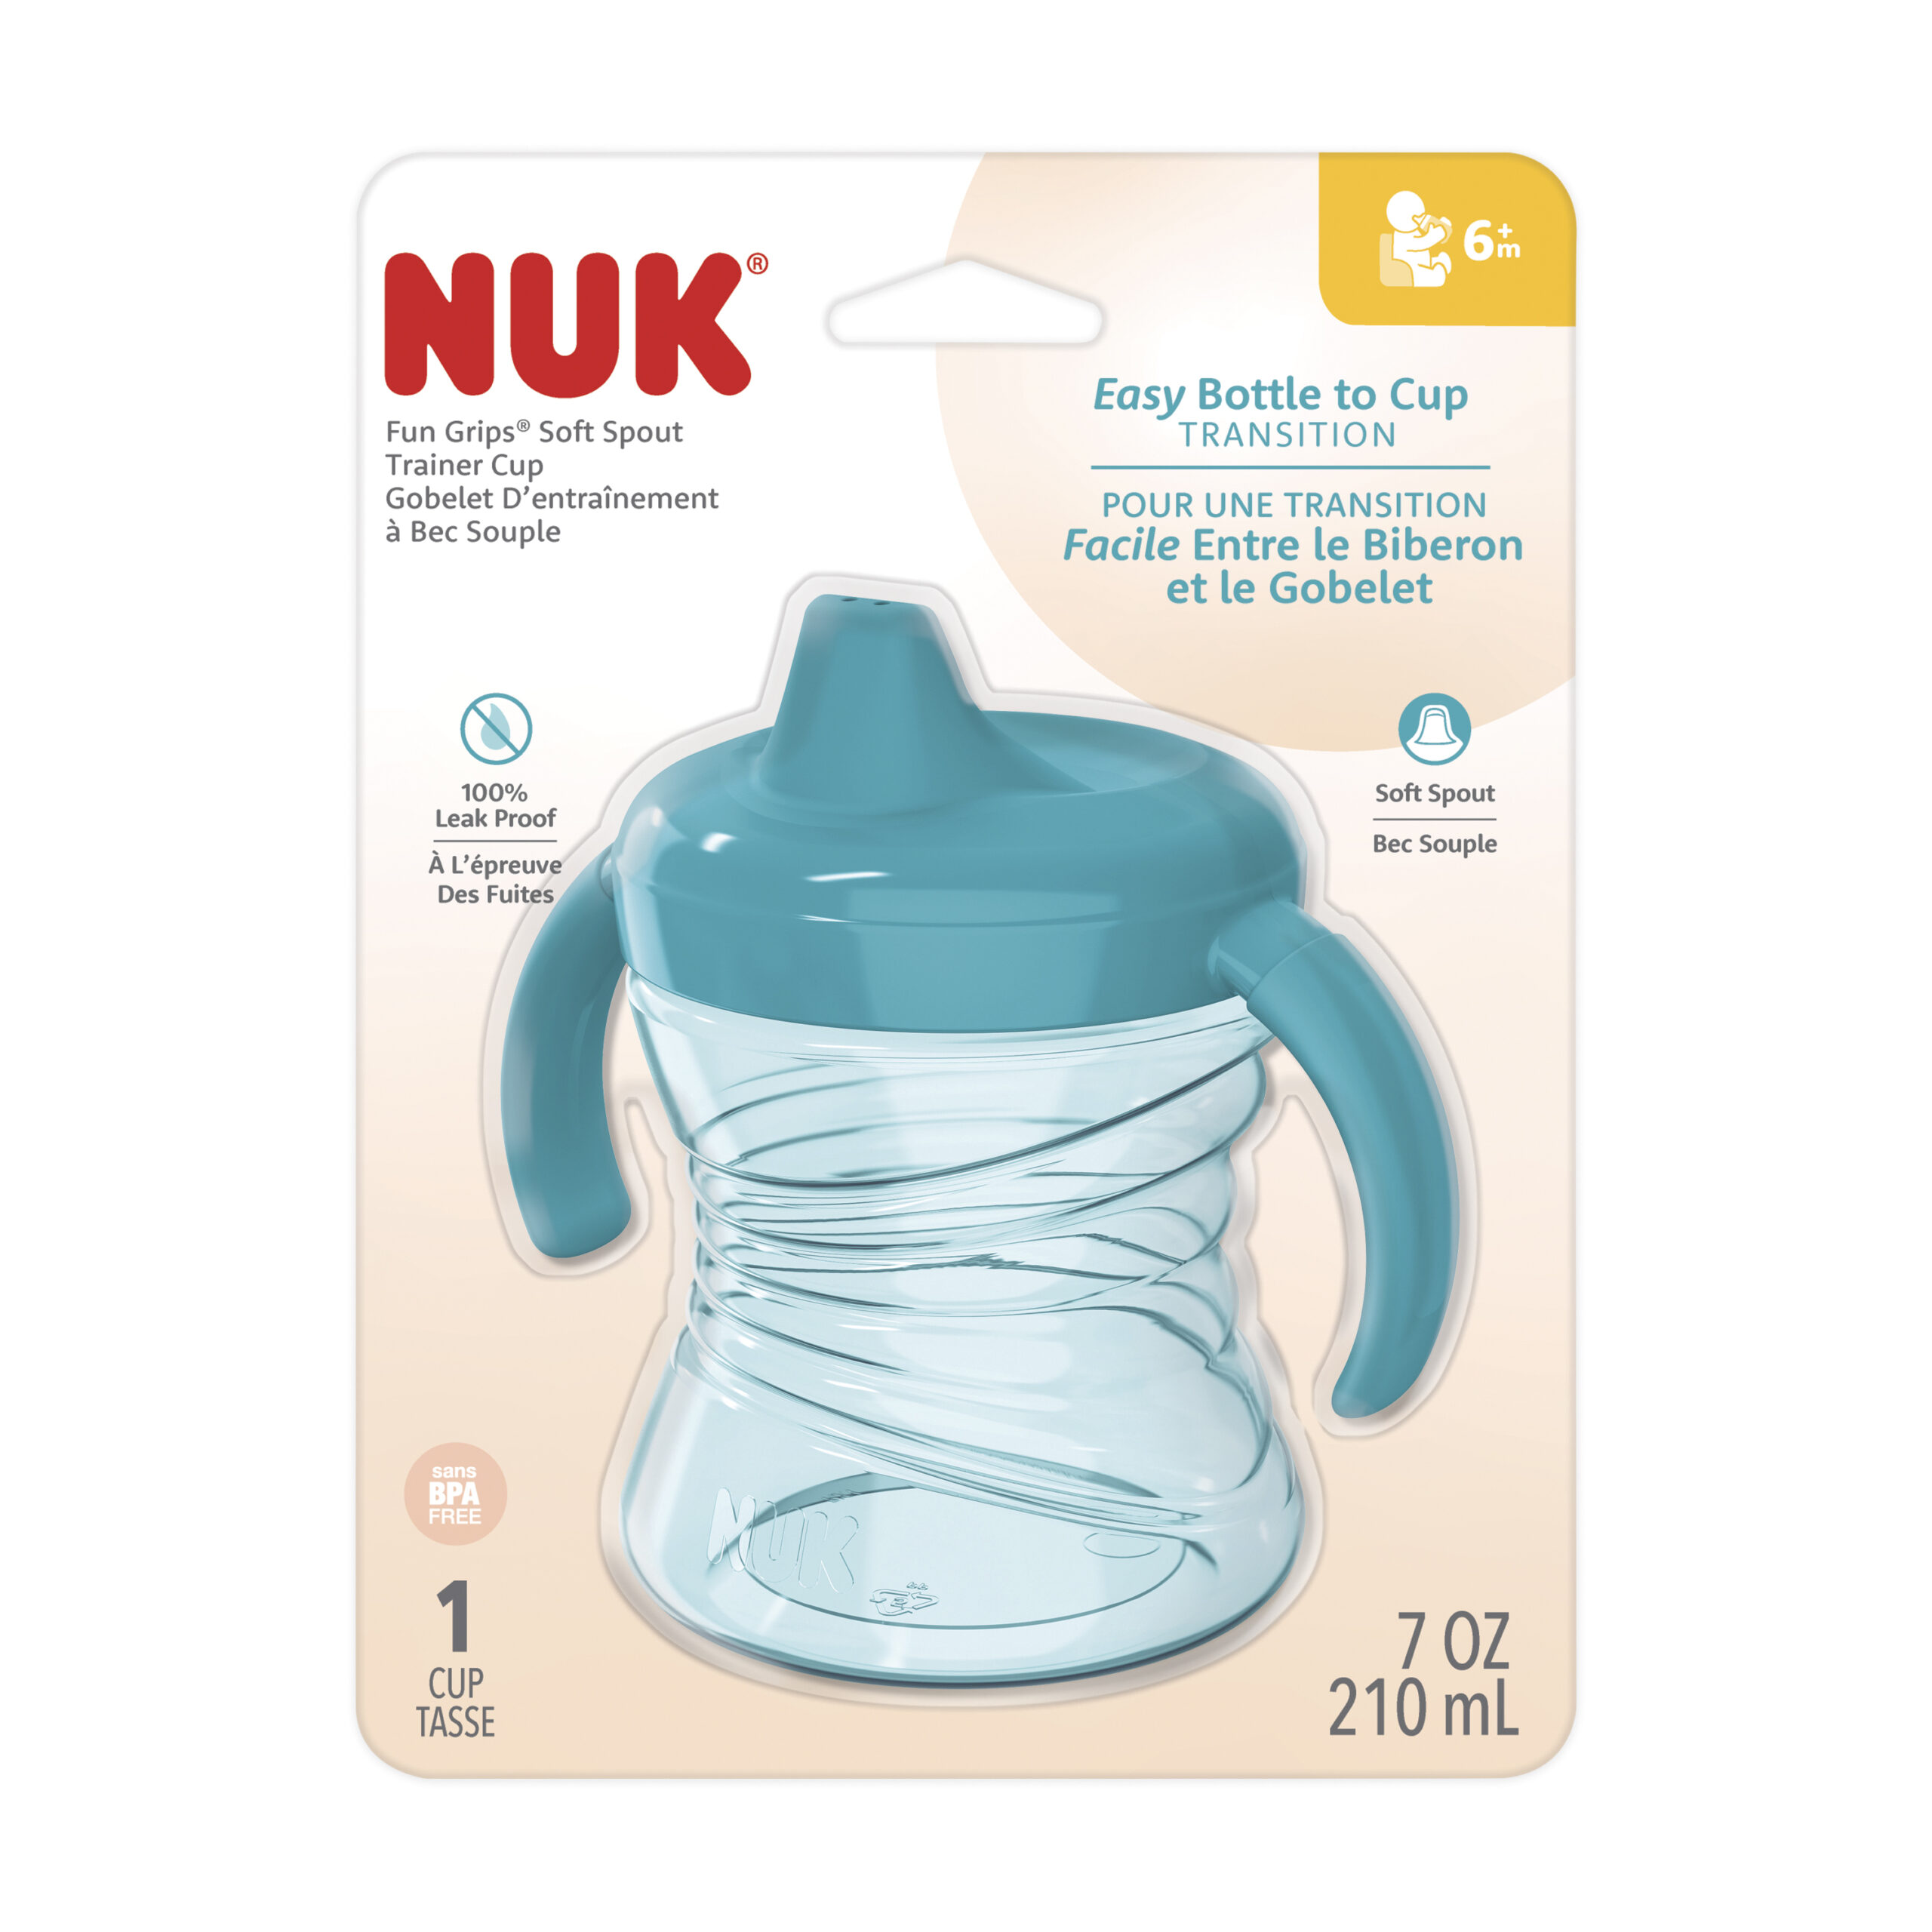 NUK® Fun Grips Hard Spout Sippy Cup, 10OZ Product Image 3 of 7